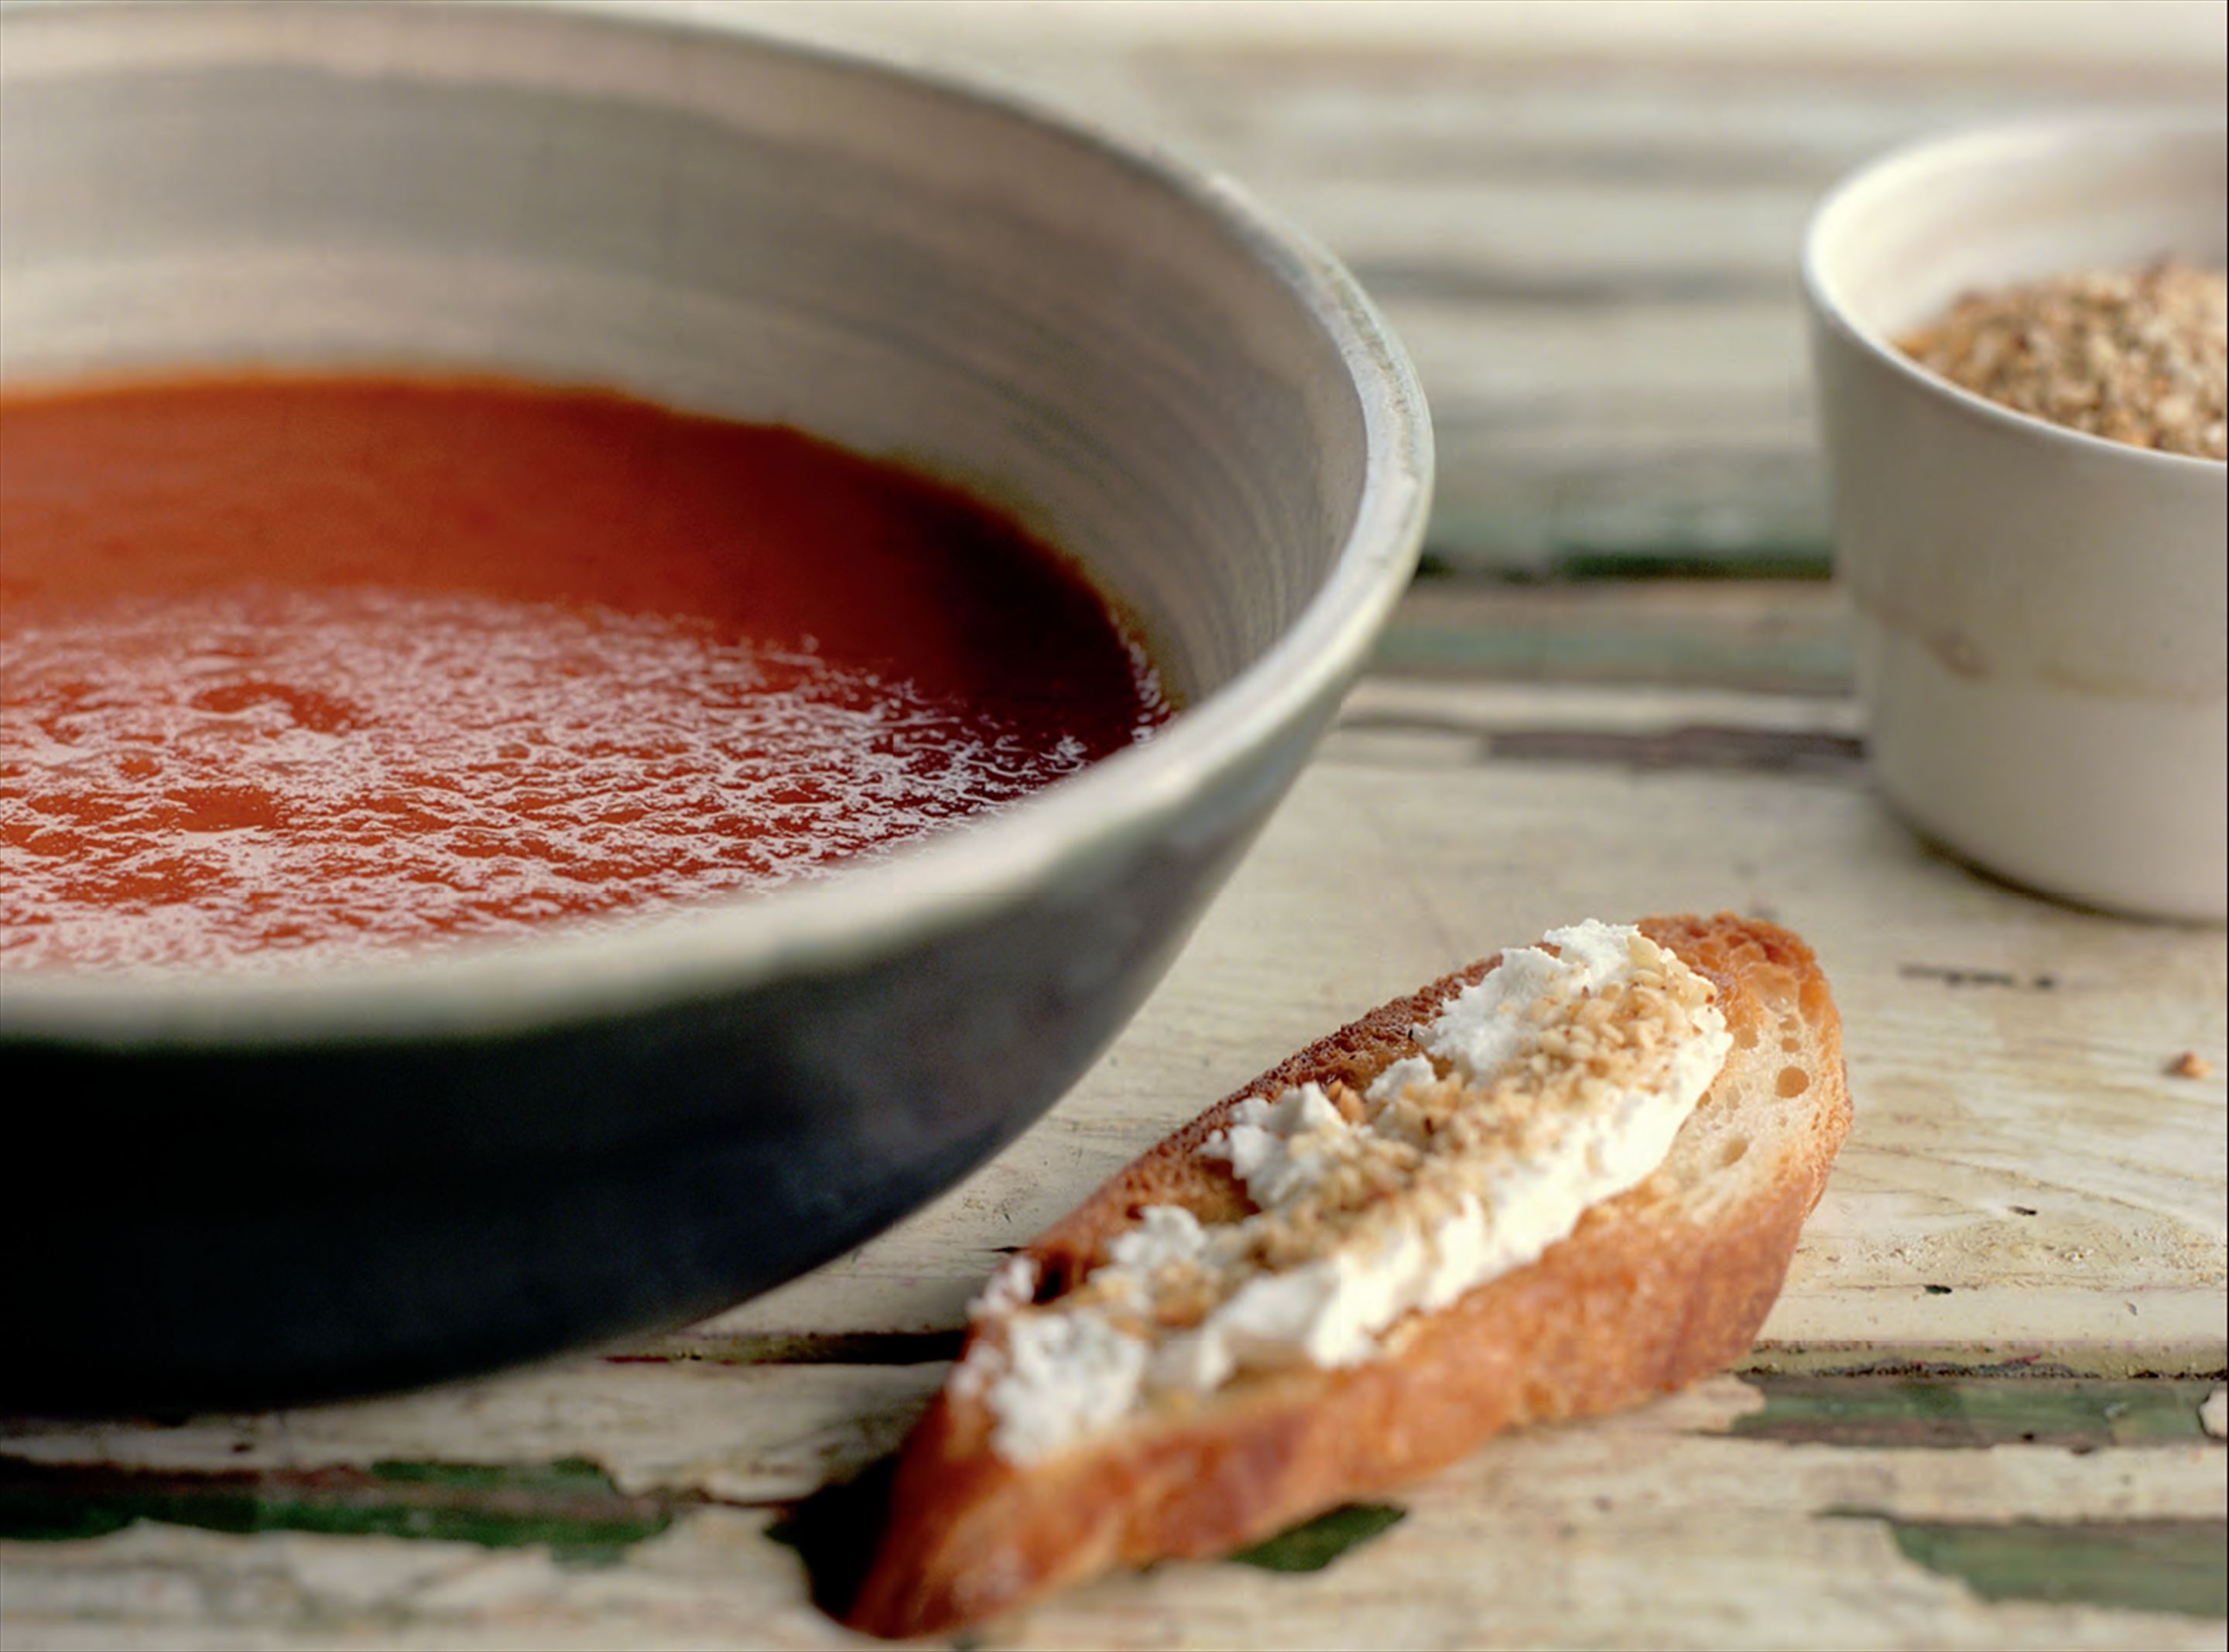 Roasted tomato and red capsicum soup with dukkah